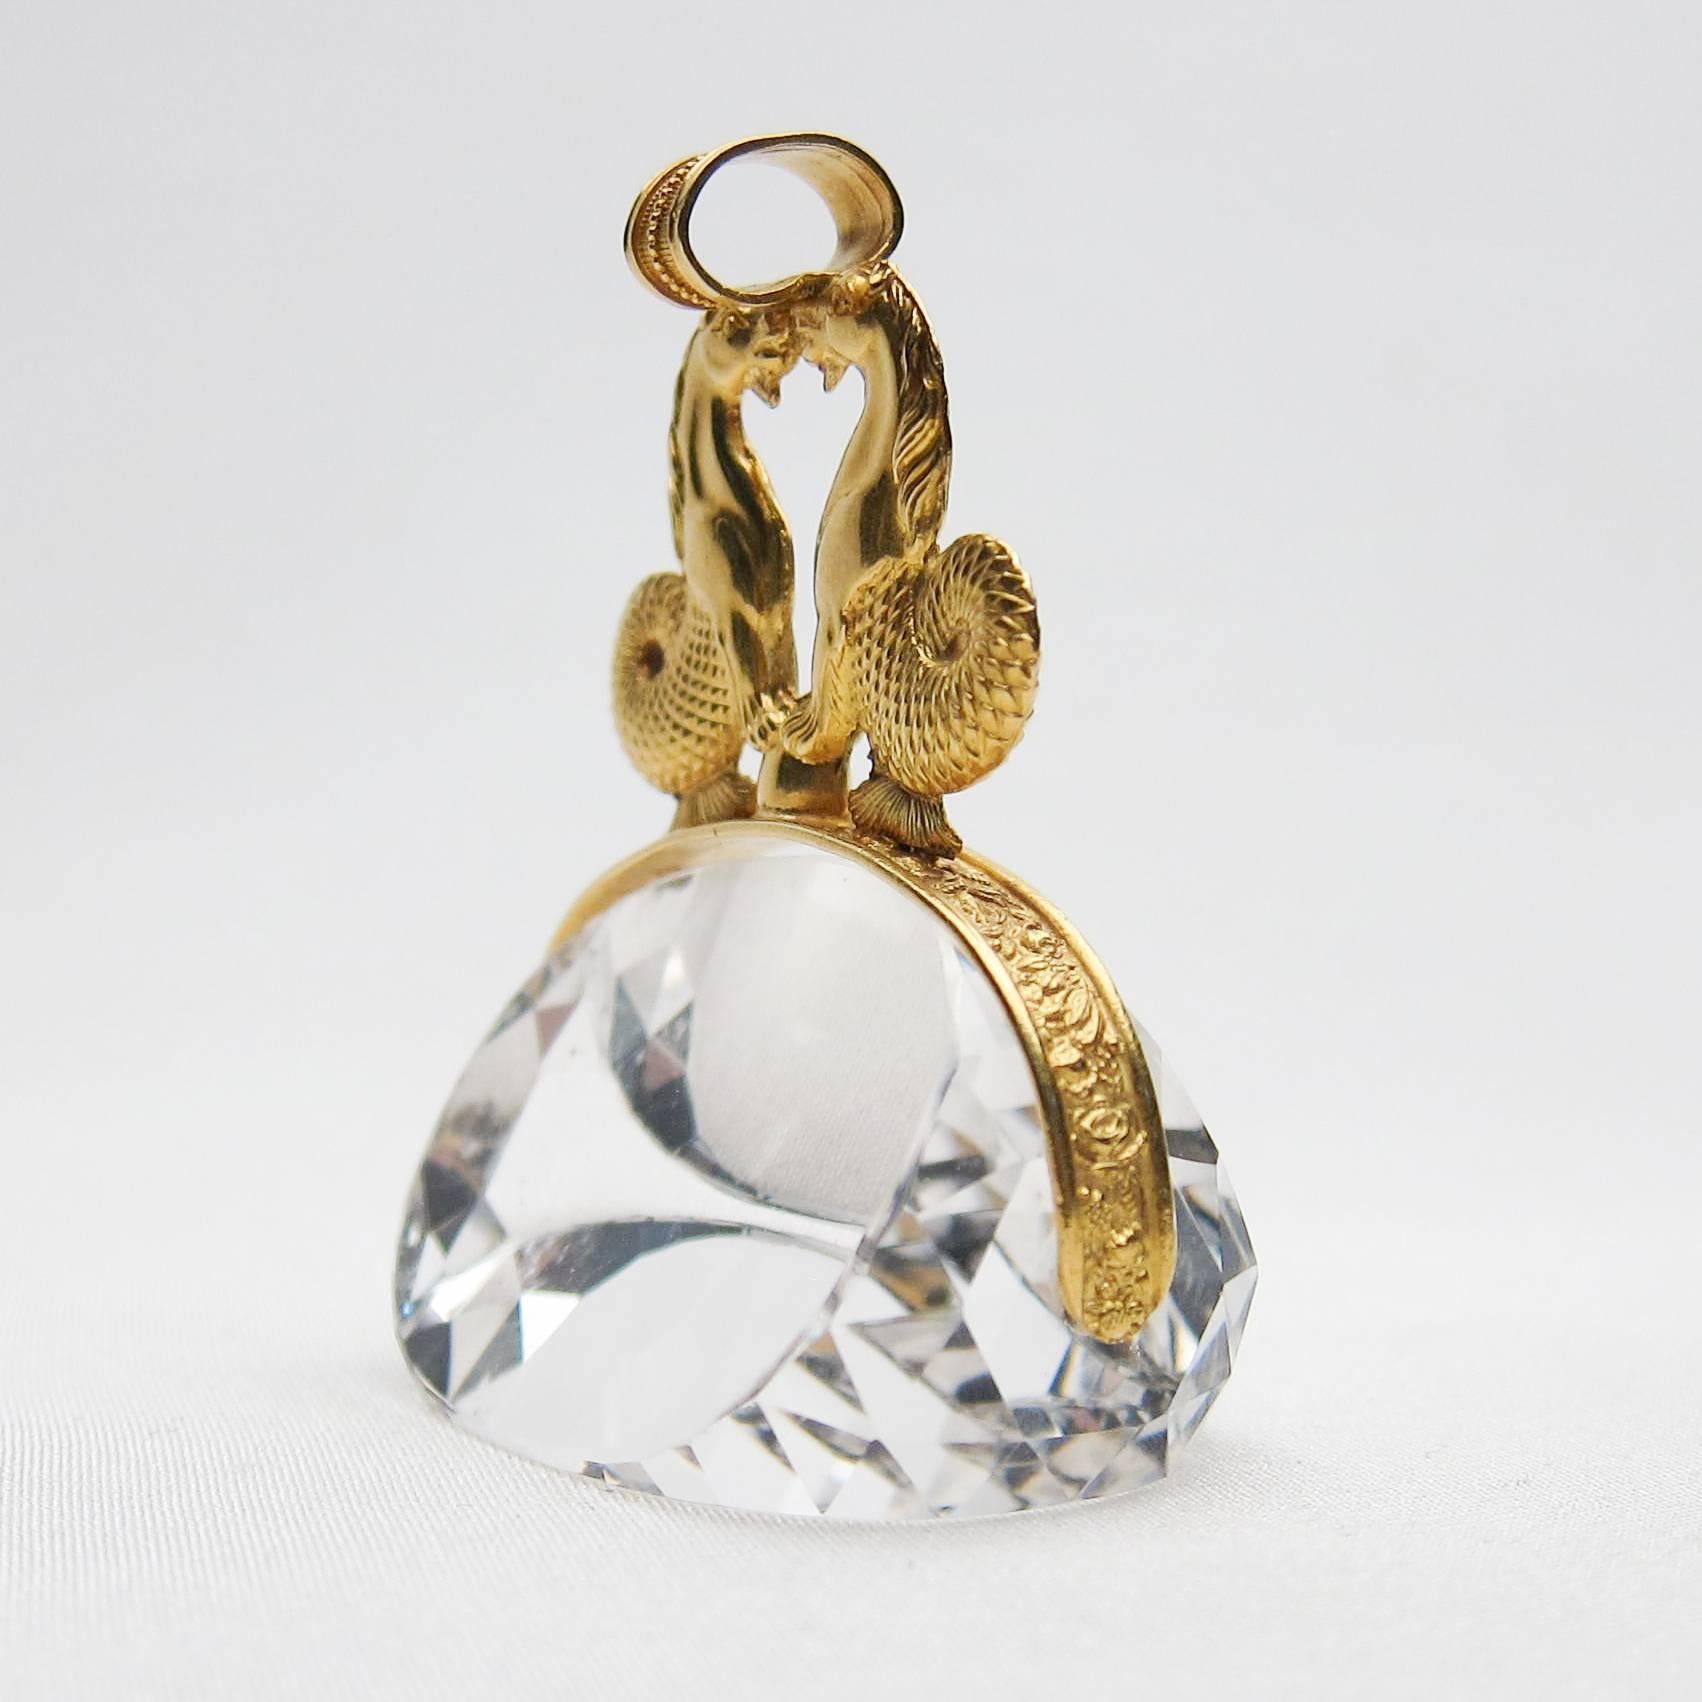 This spectacular crystal fob is a paragon of antique beauty! The crystal-clear quartz stone is topped with two (joined) 18KT gold seahorses. The oval, triangular-faceted colorless stone measures 38mm x 23mm x 23mm. This fob would make a stunning